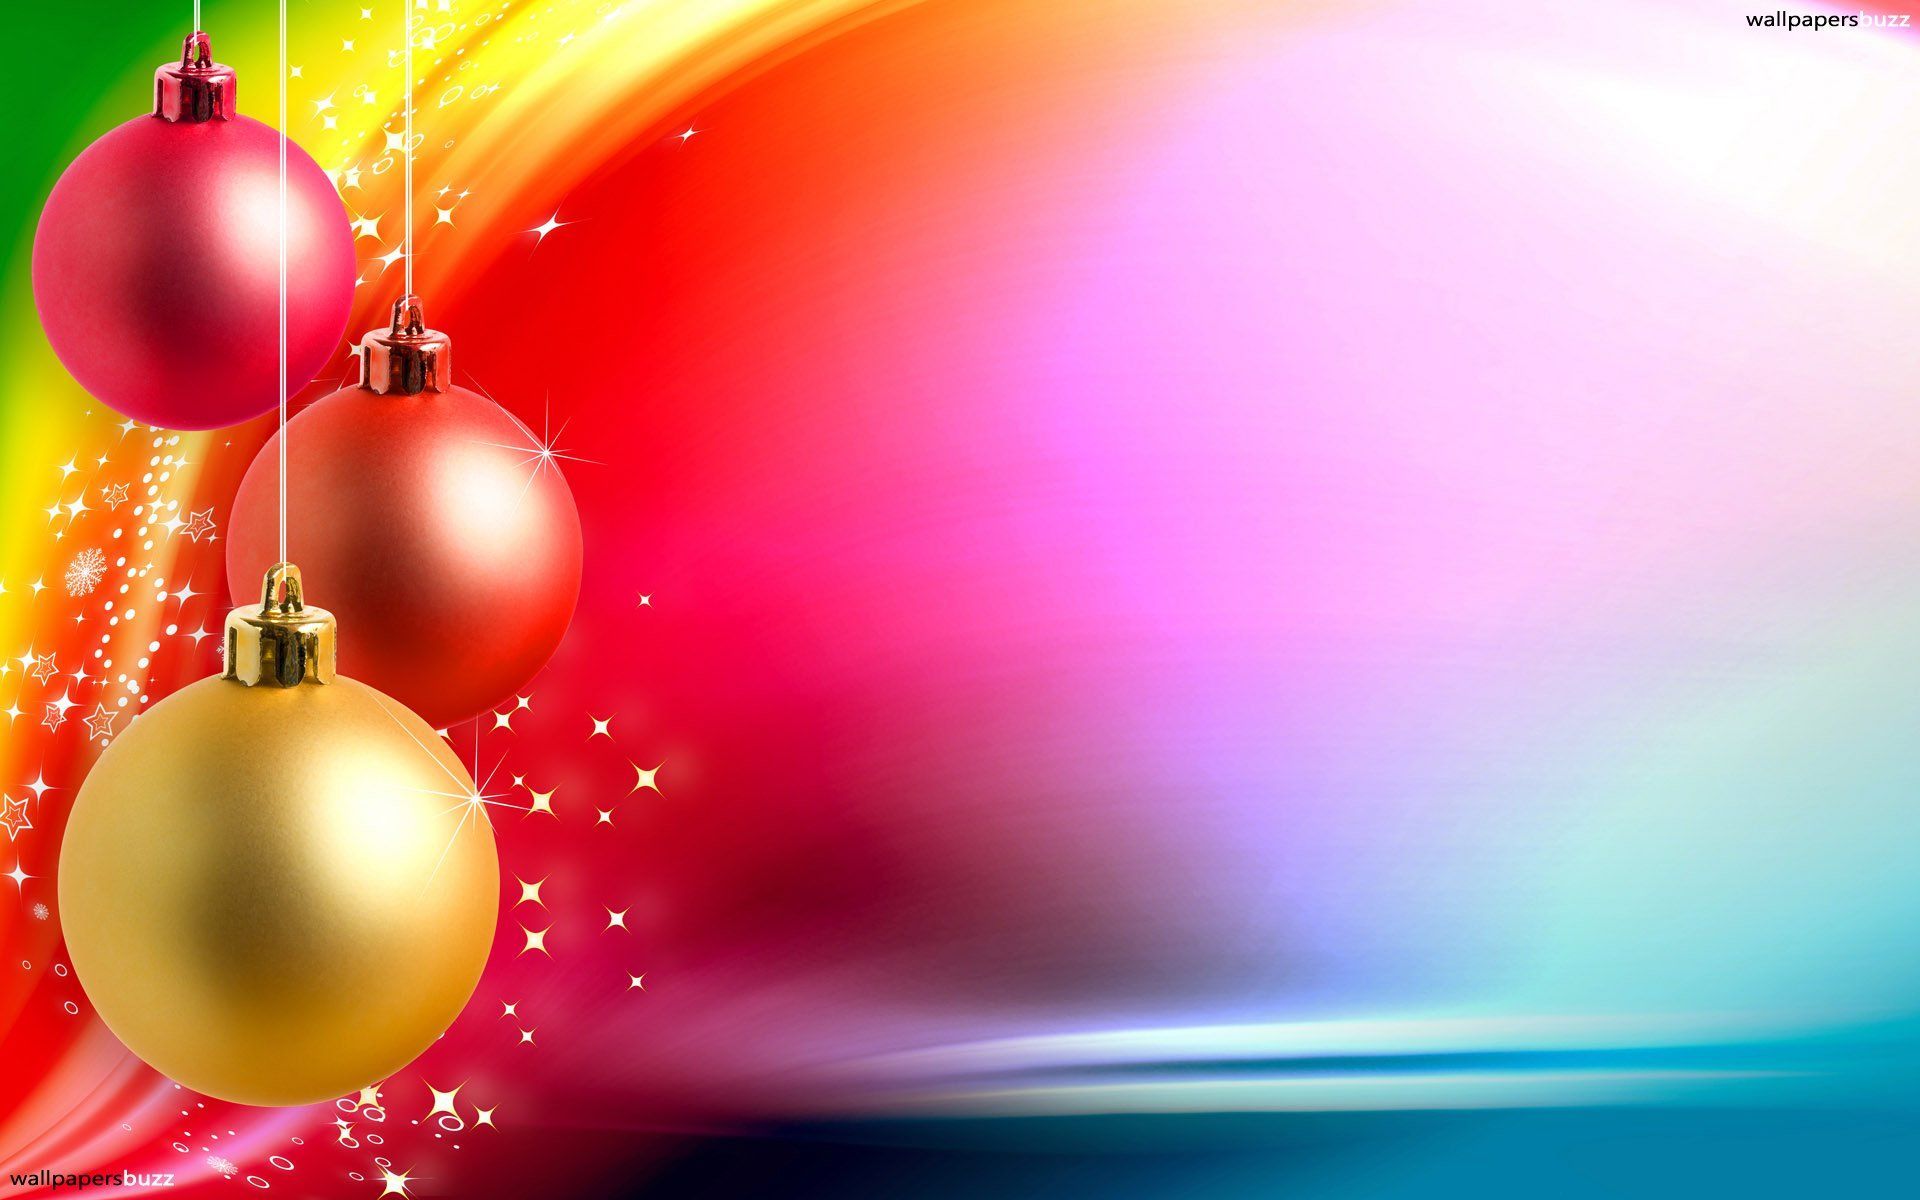 Colorful background HD Wallpaper